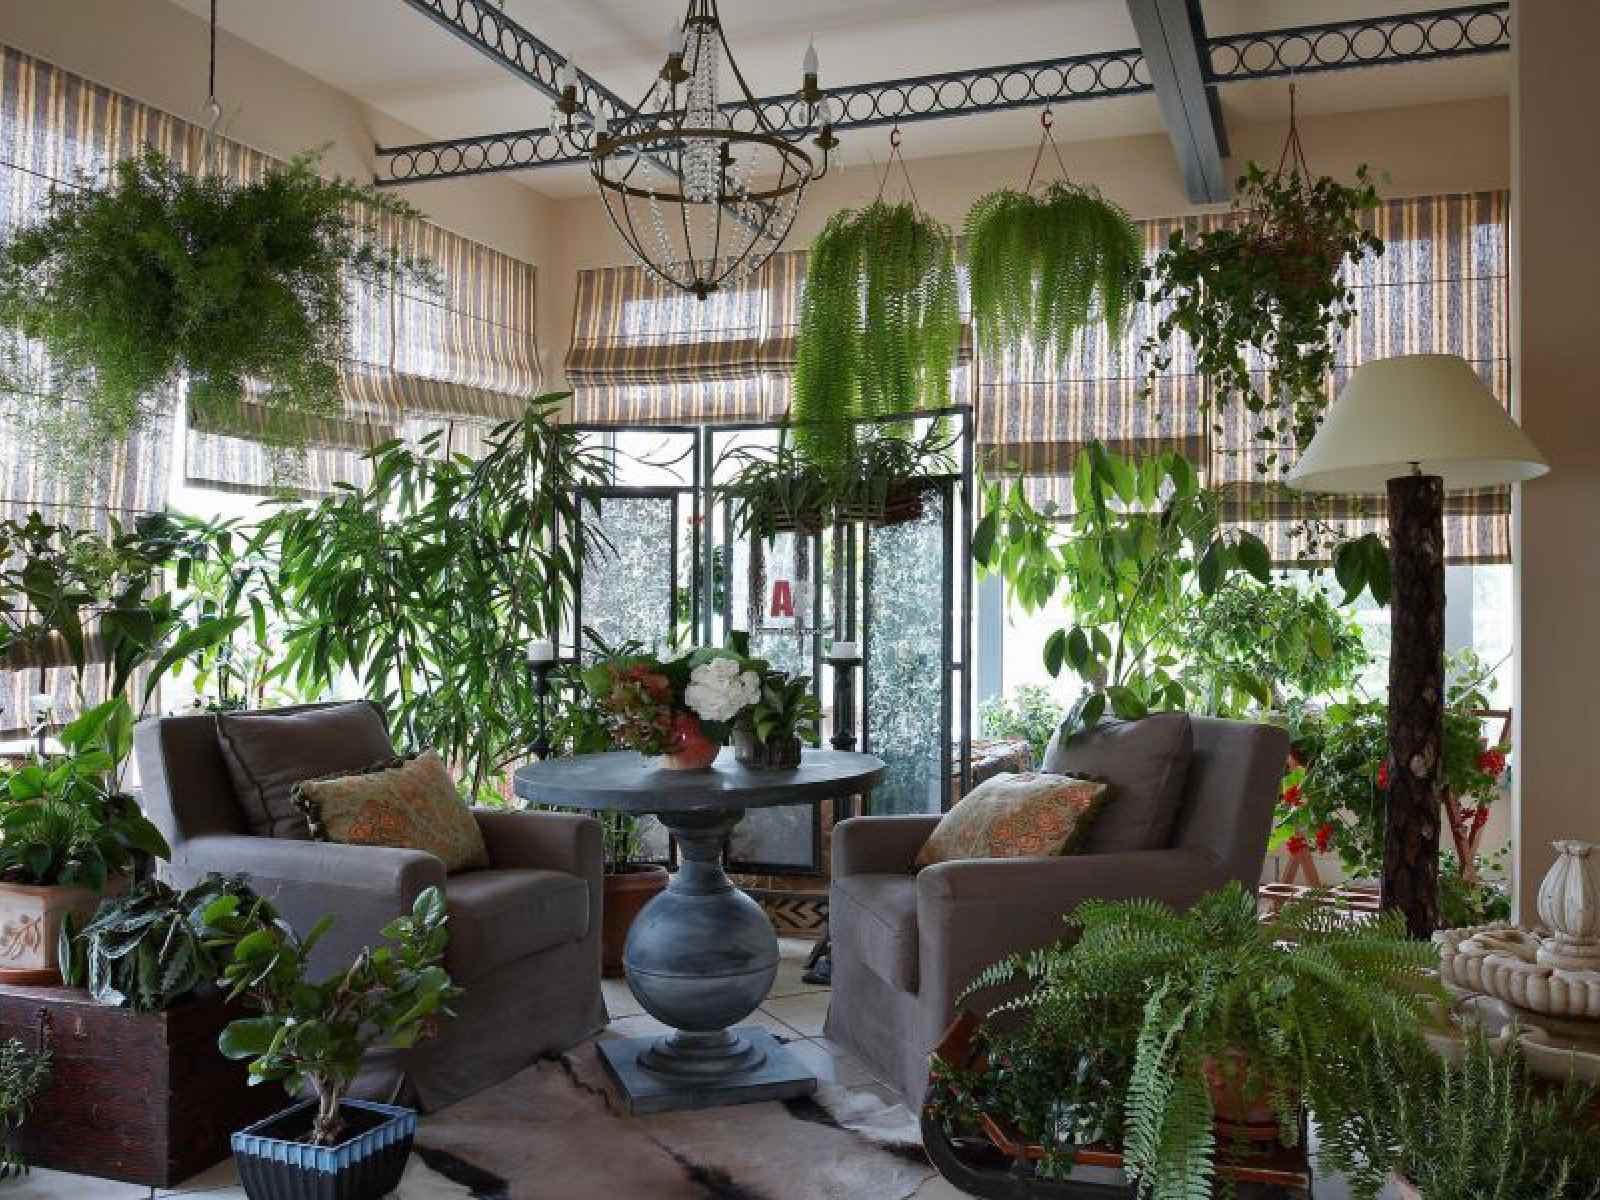 option for applying bright ideas for decorating a winter garden in a house